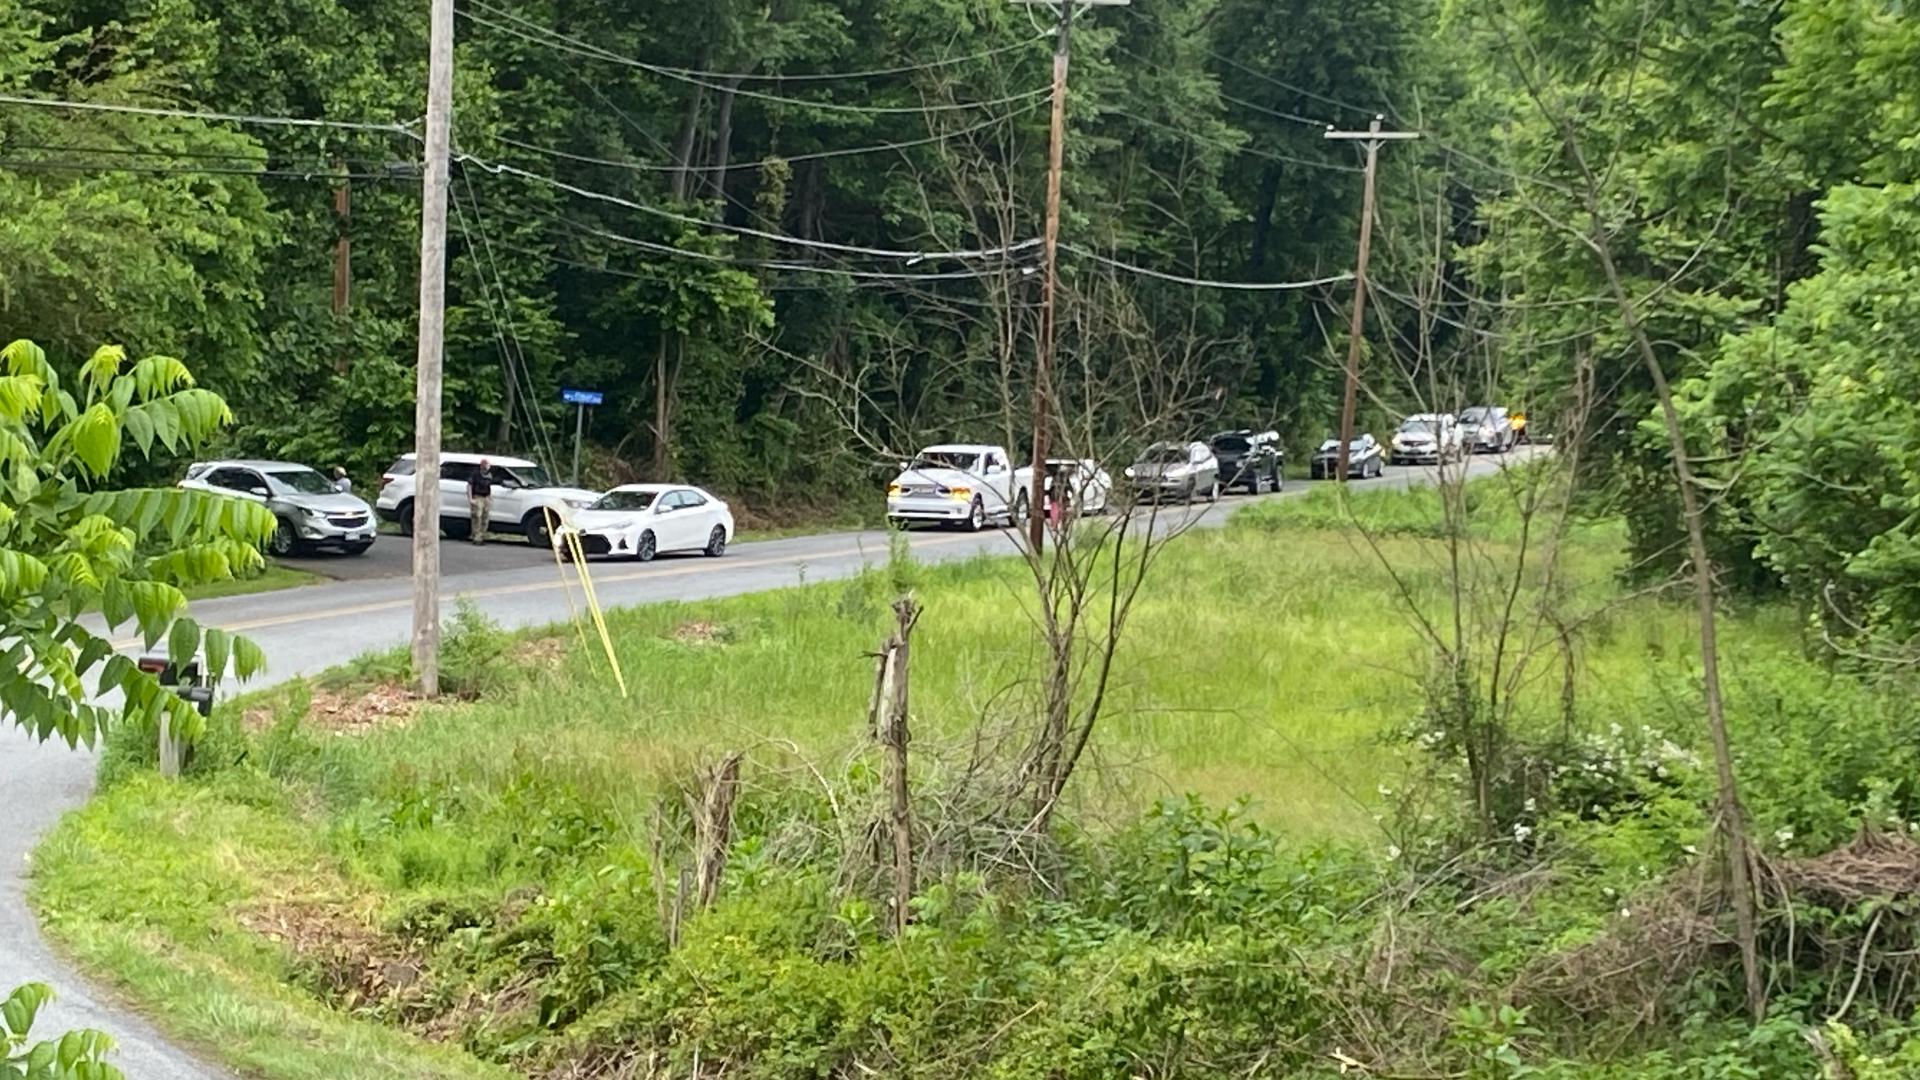 Authorities were at the scene of what they are describing as a police incident in the area of Elmer Avenue in Halifax Township, and asked people to stay away.